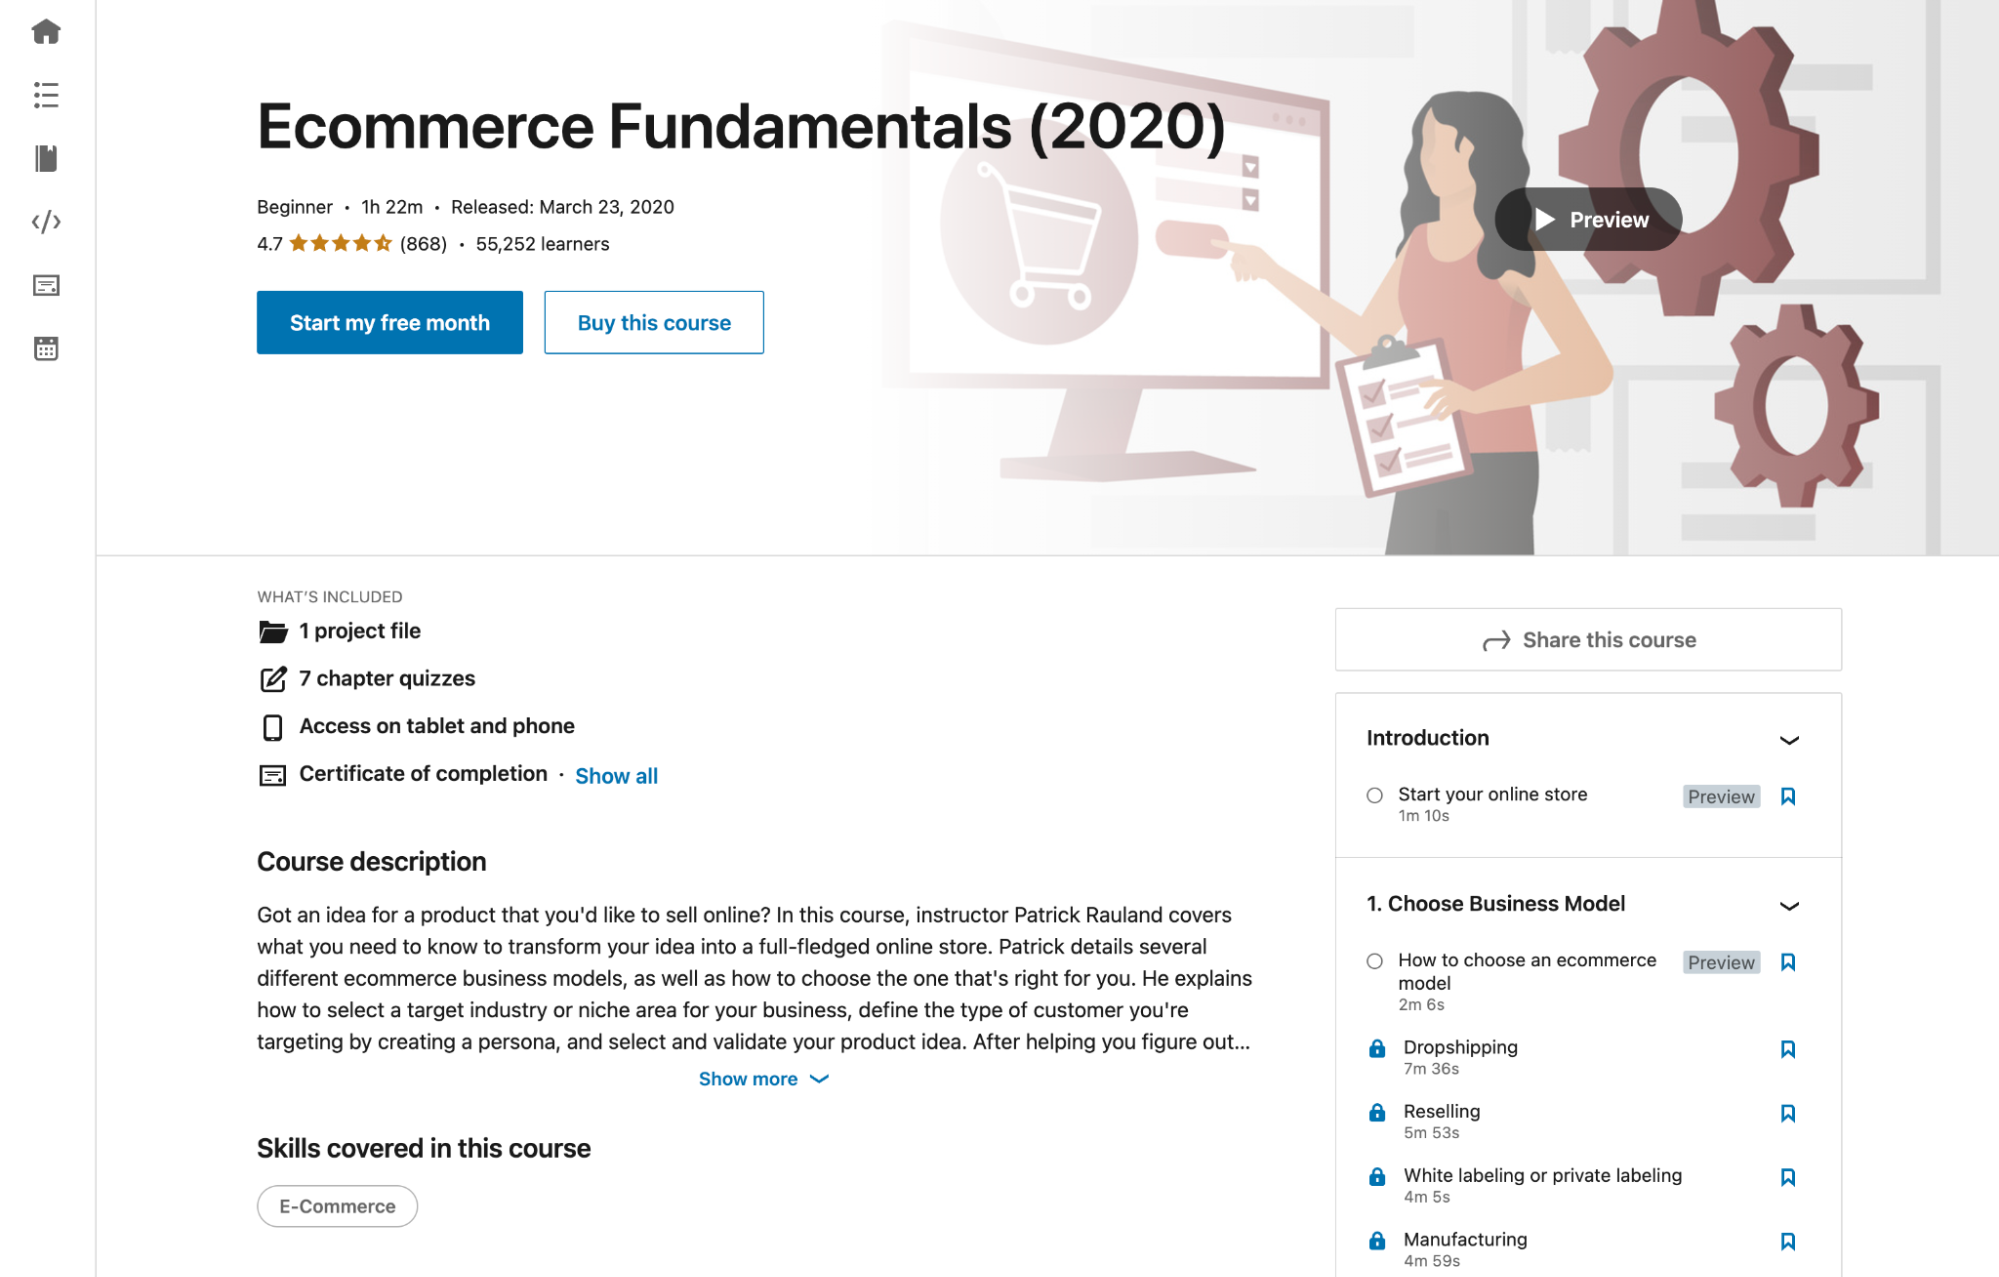 image of the ecommerce fundamentals course from LinkedIn